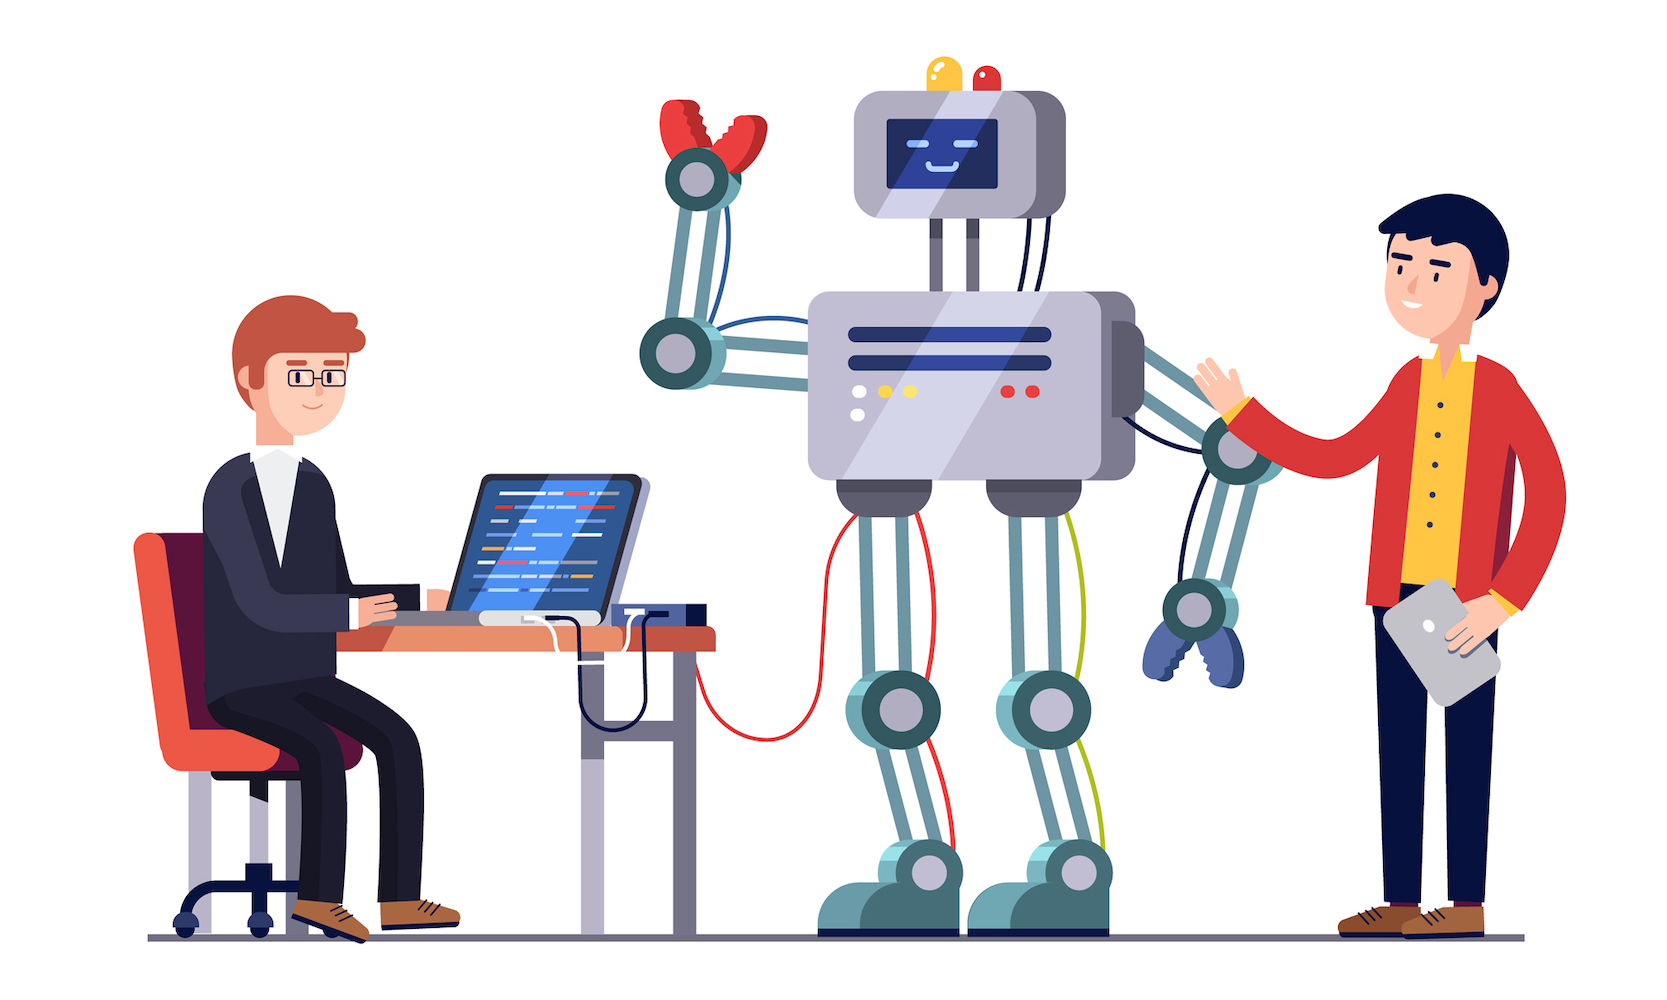 Illustration of two developers working together to program a robot